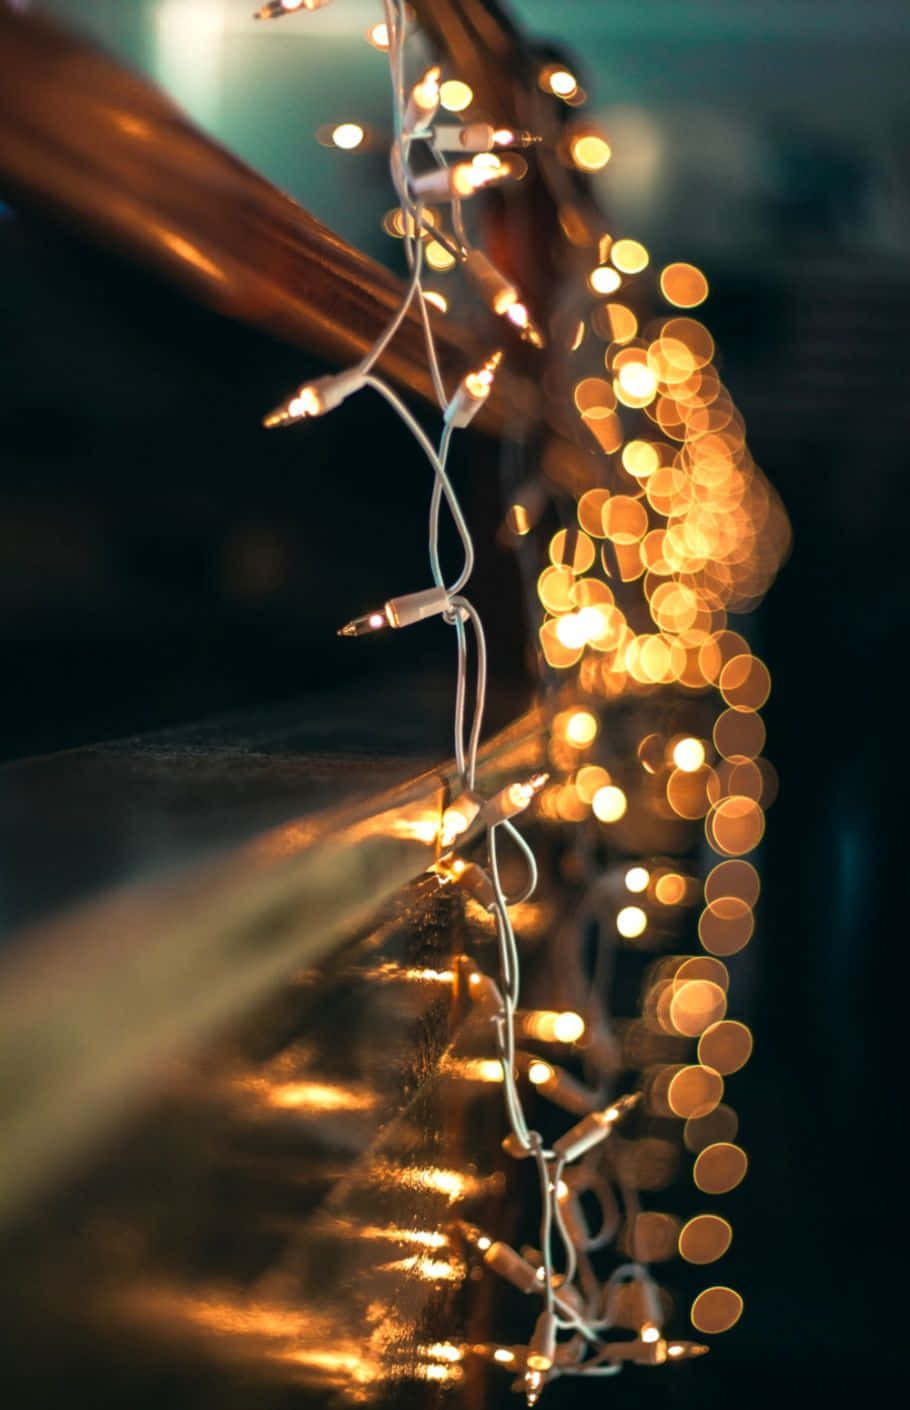 Spread the holiday cheer this season with twinkling Christmas lights! Wallpaper